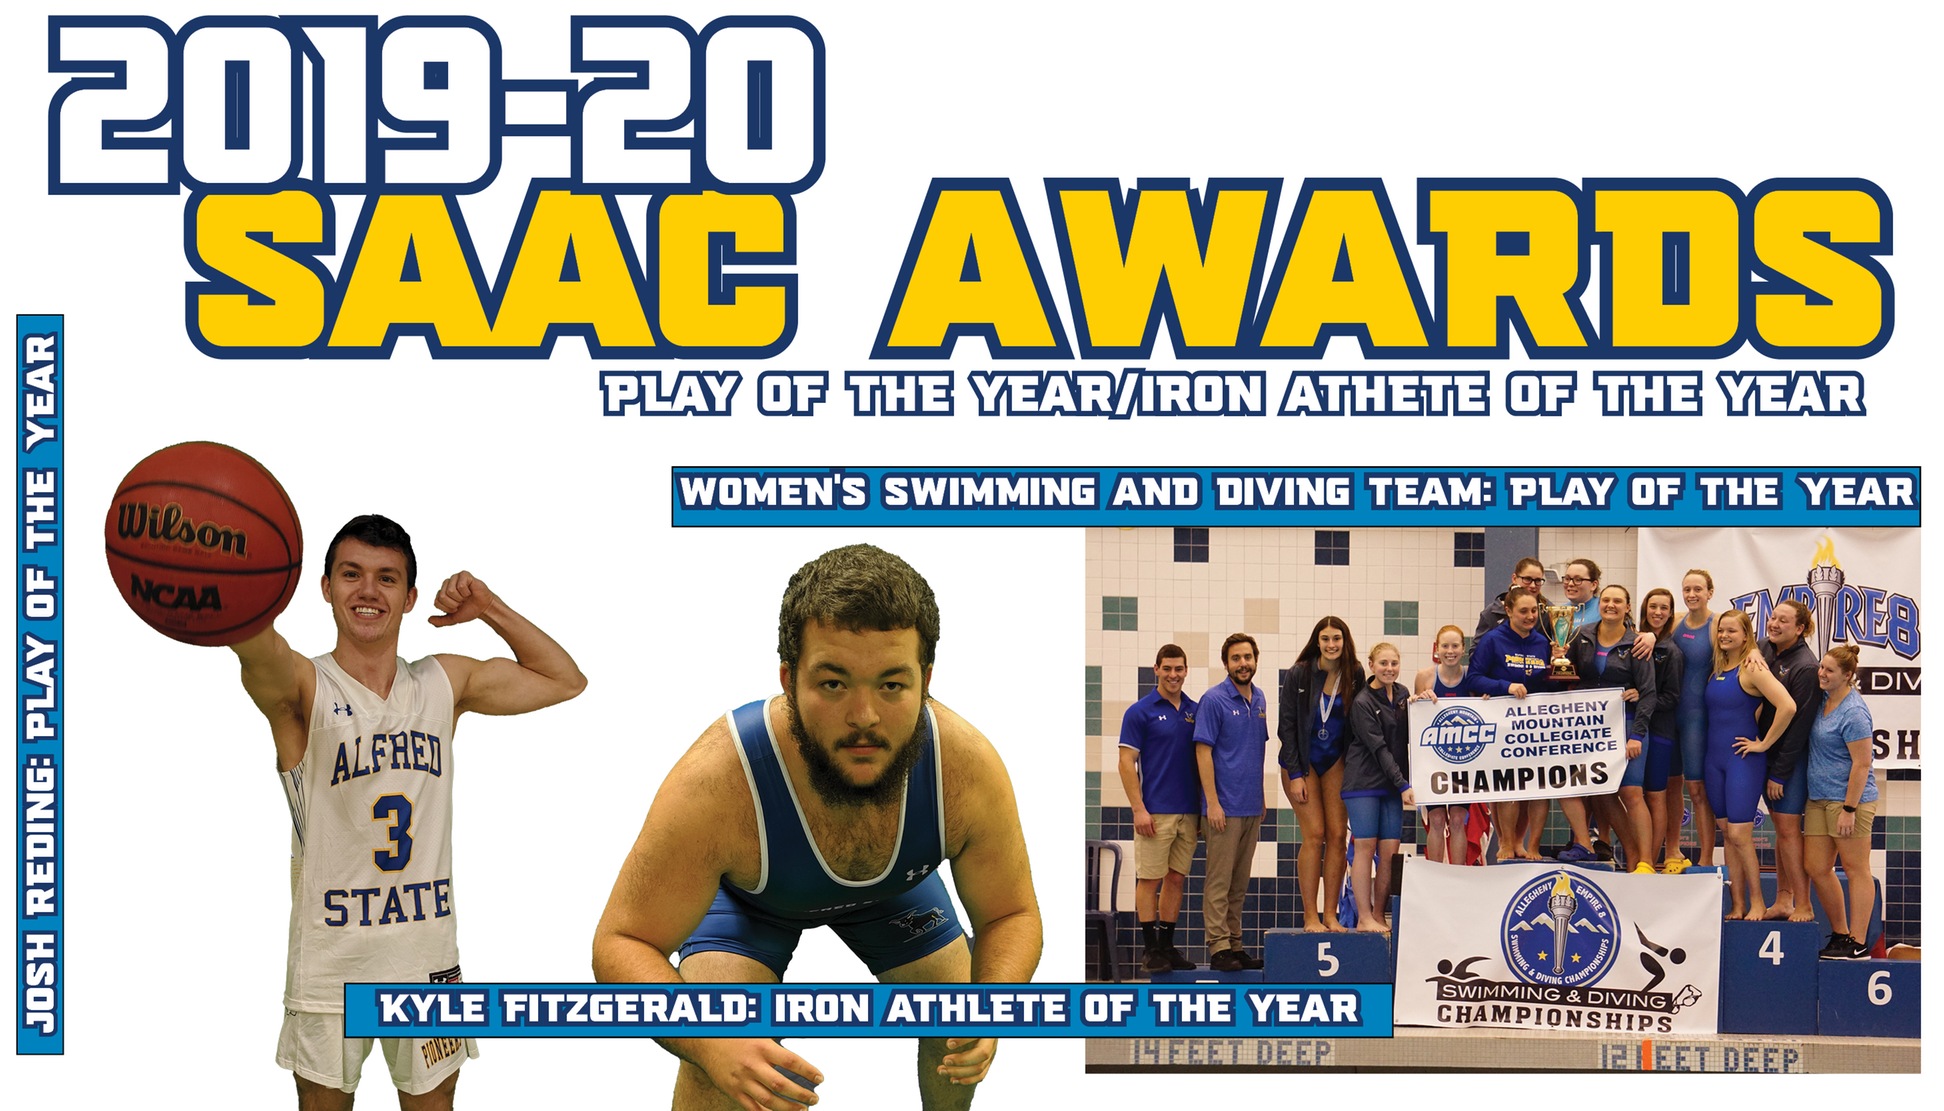 SAAC Award Winners - Josh Reding and Women's Swimming & Diving - named Play of the Year & Kyle Fitzgerald - Iron Athlete of the Year.